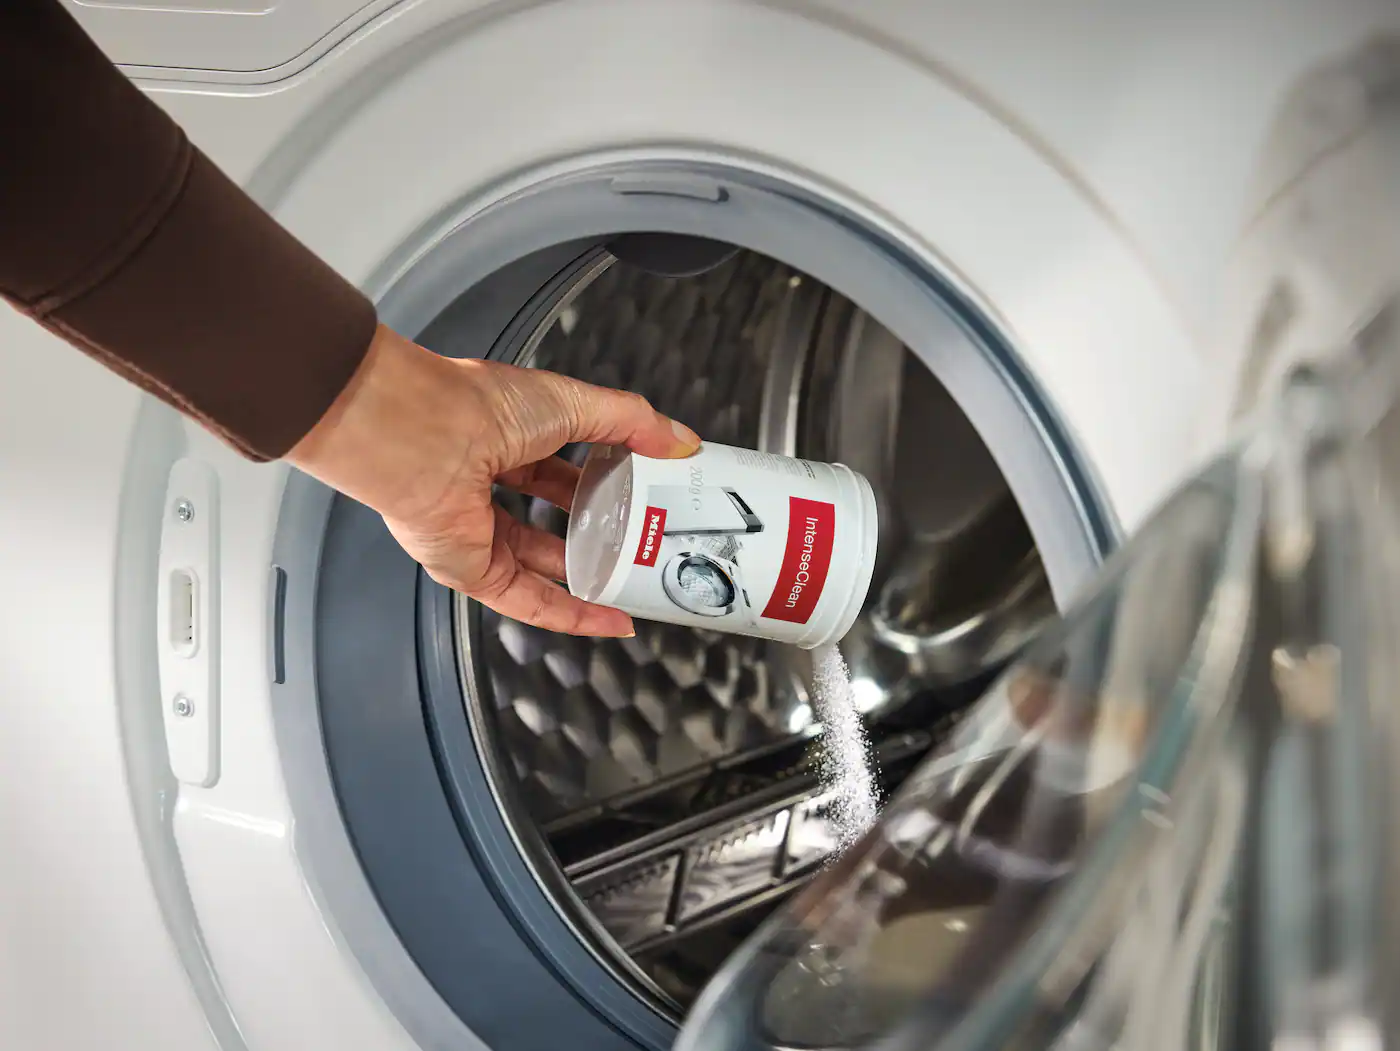 A person sprinkling Miele IntenseClean into a Miele washing machine